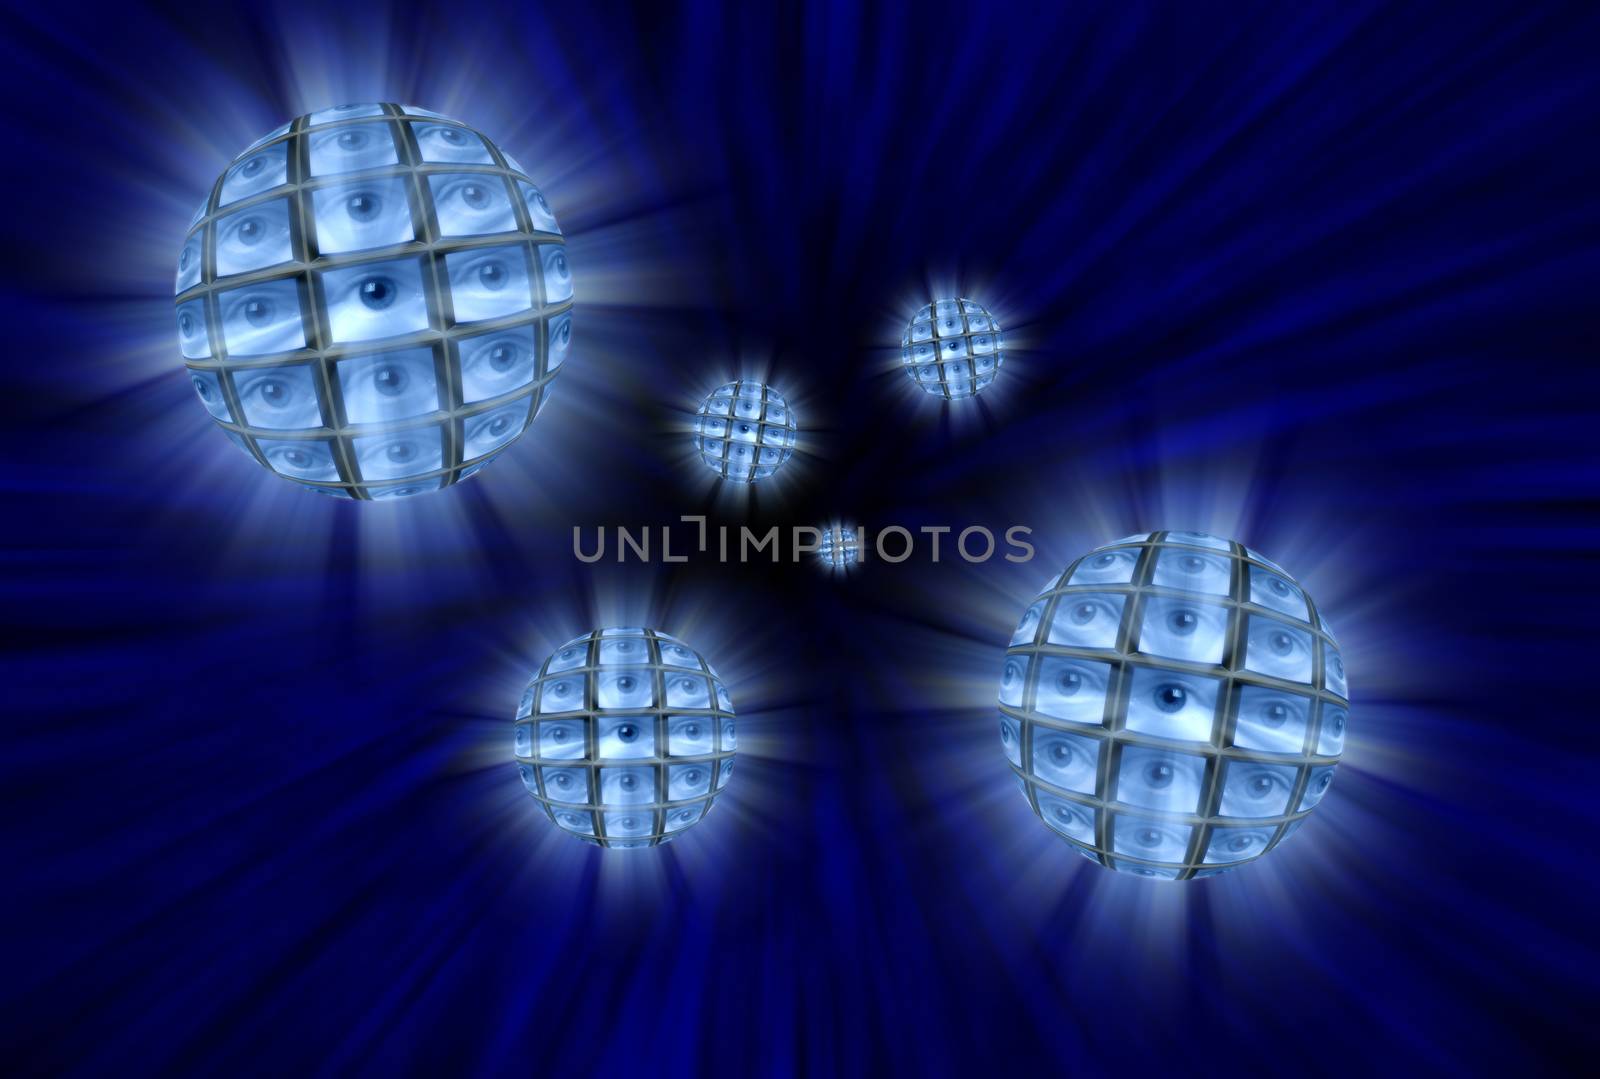 Spheres with video screens showing eyes in a vortex by Balefire9